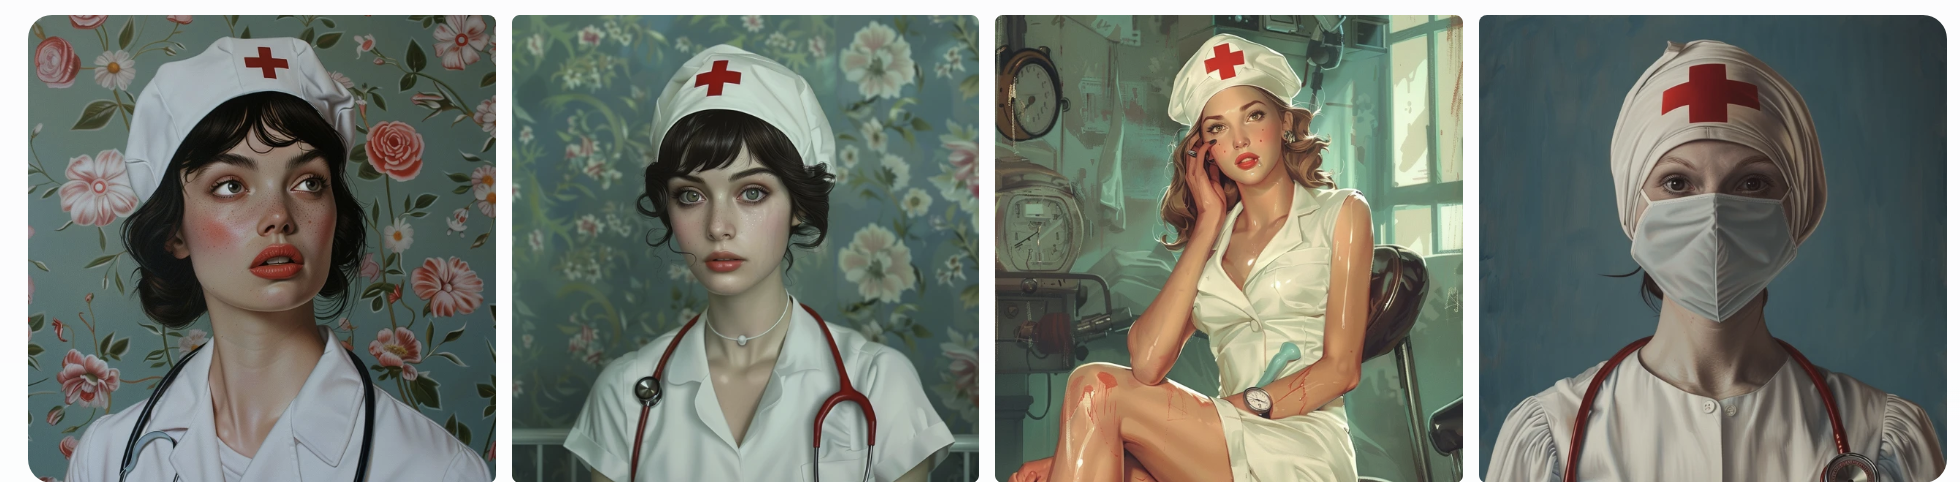 genai images with prompt nurse, showing all female subjects